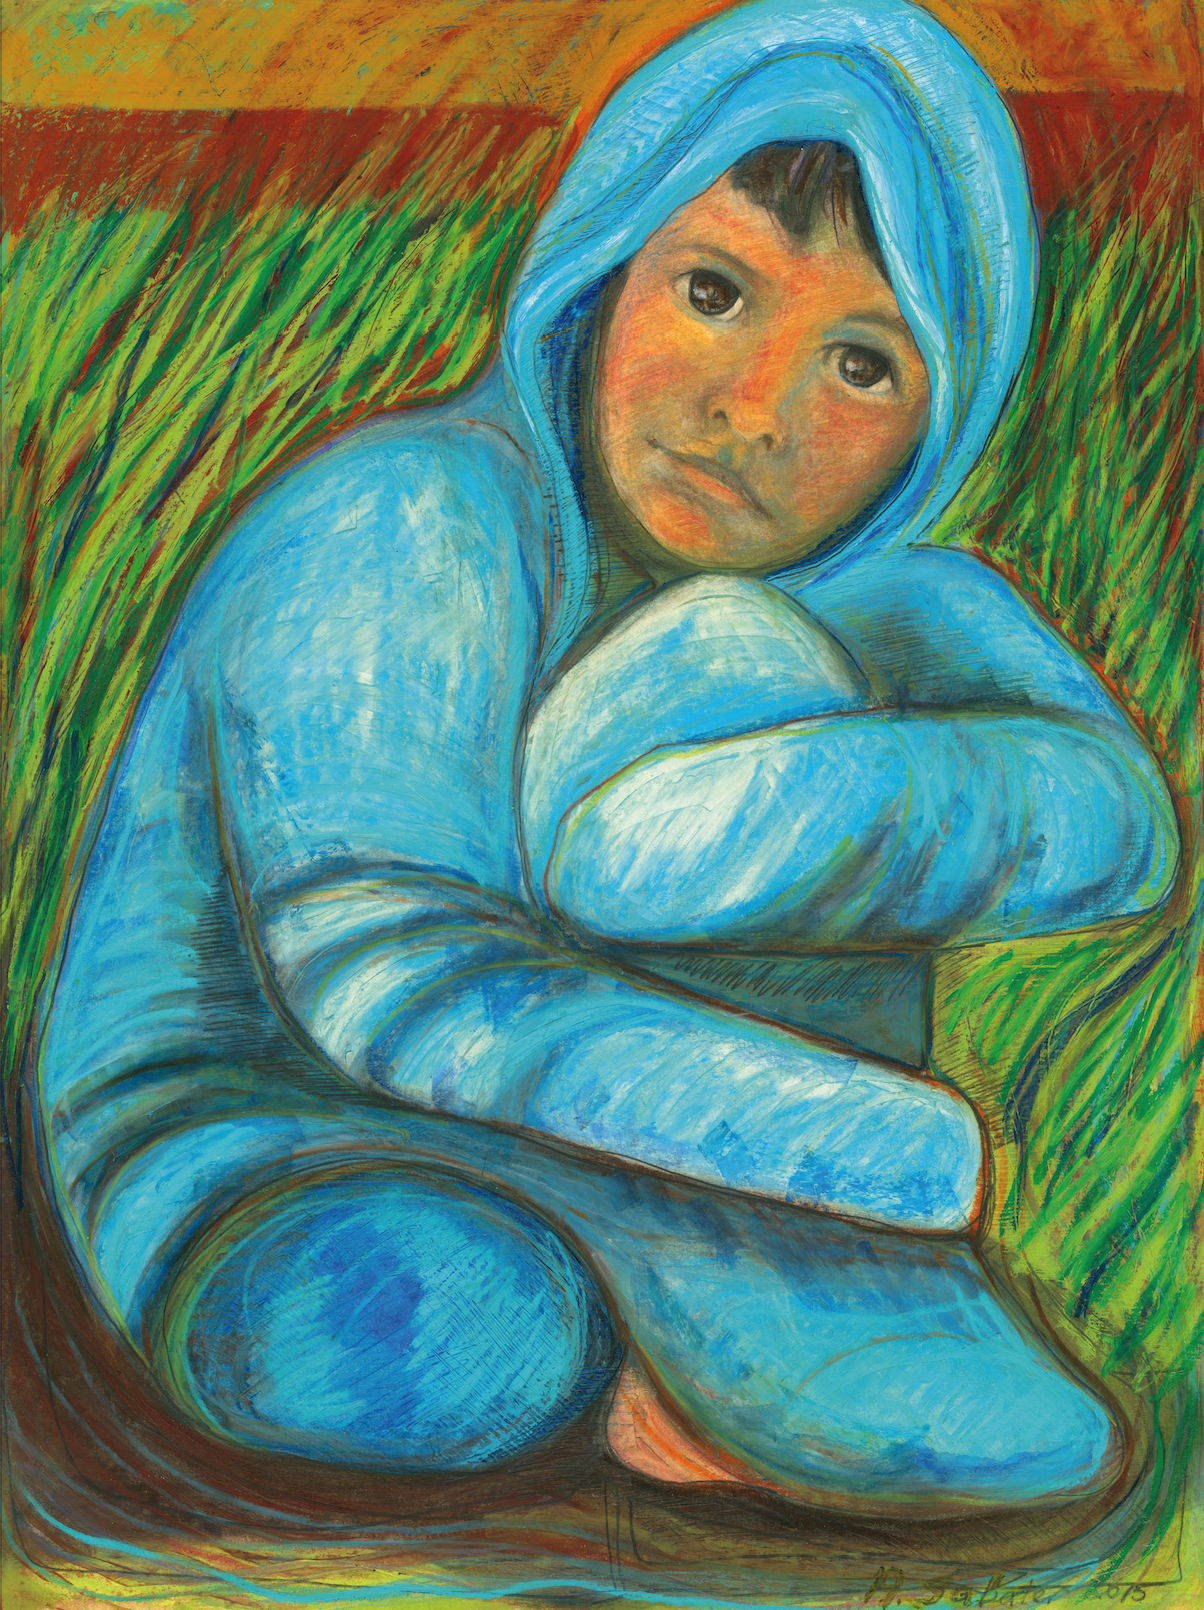 Hoodie Shell. Oil pastel and graphite on paper. 18x24 in.